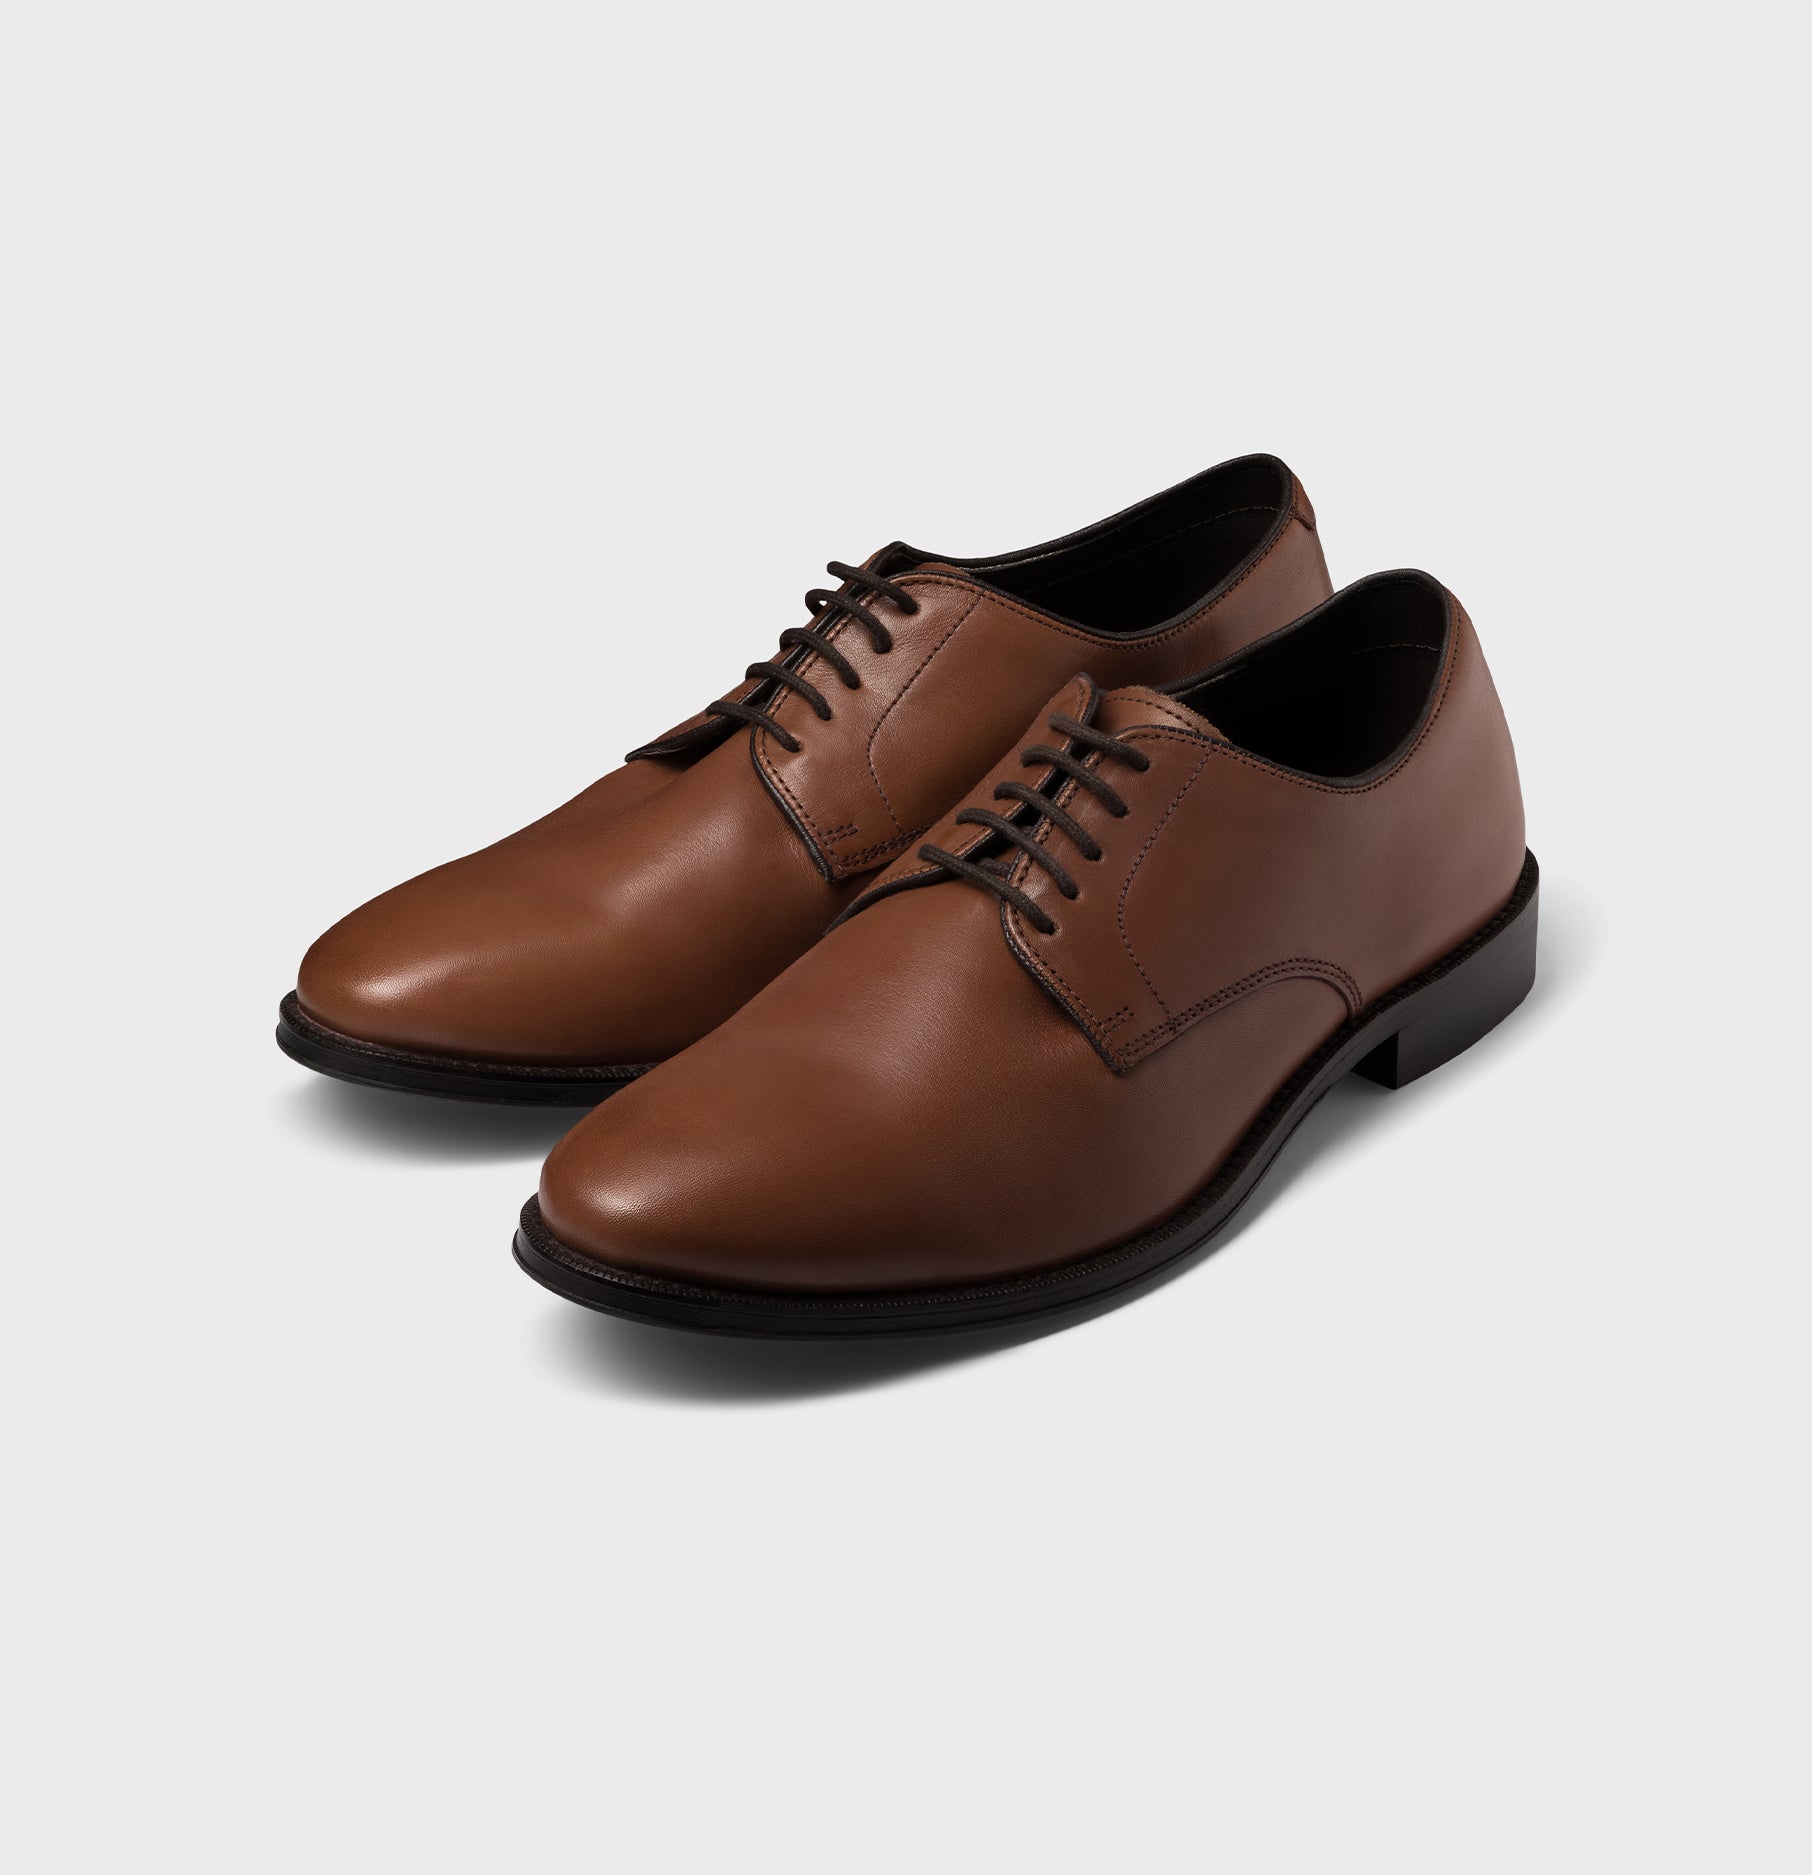 Brown or Black Shoes with Navy Suit | SuitShop